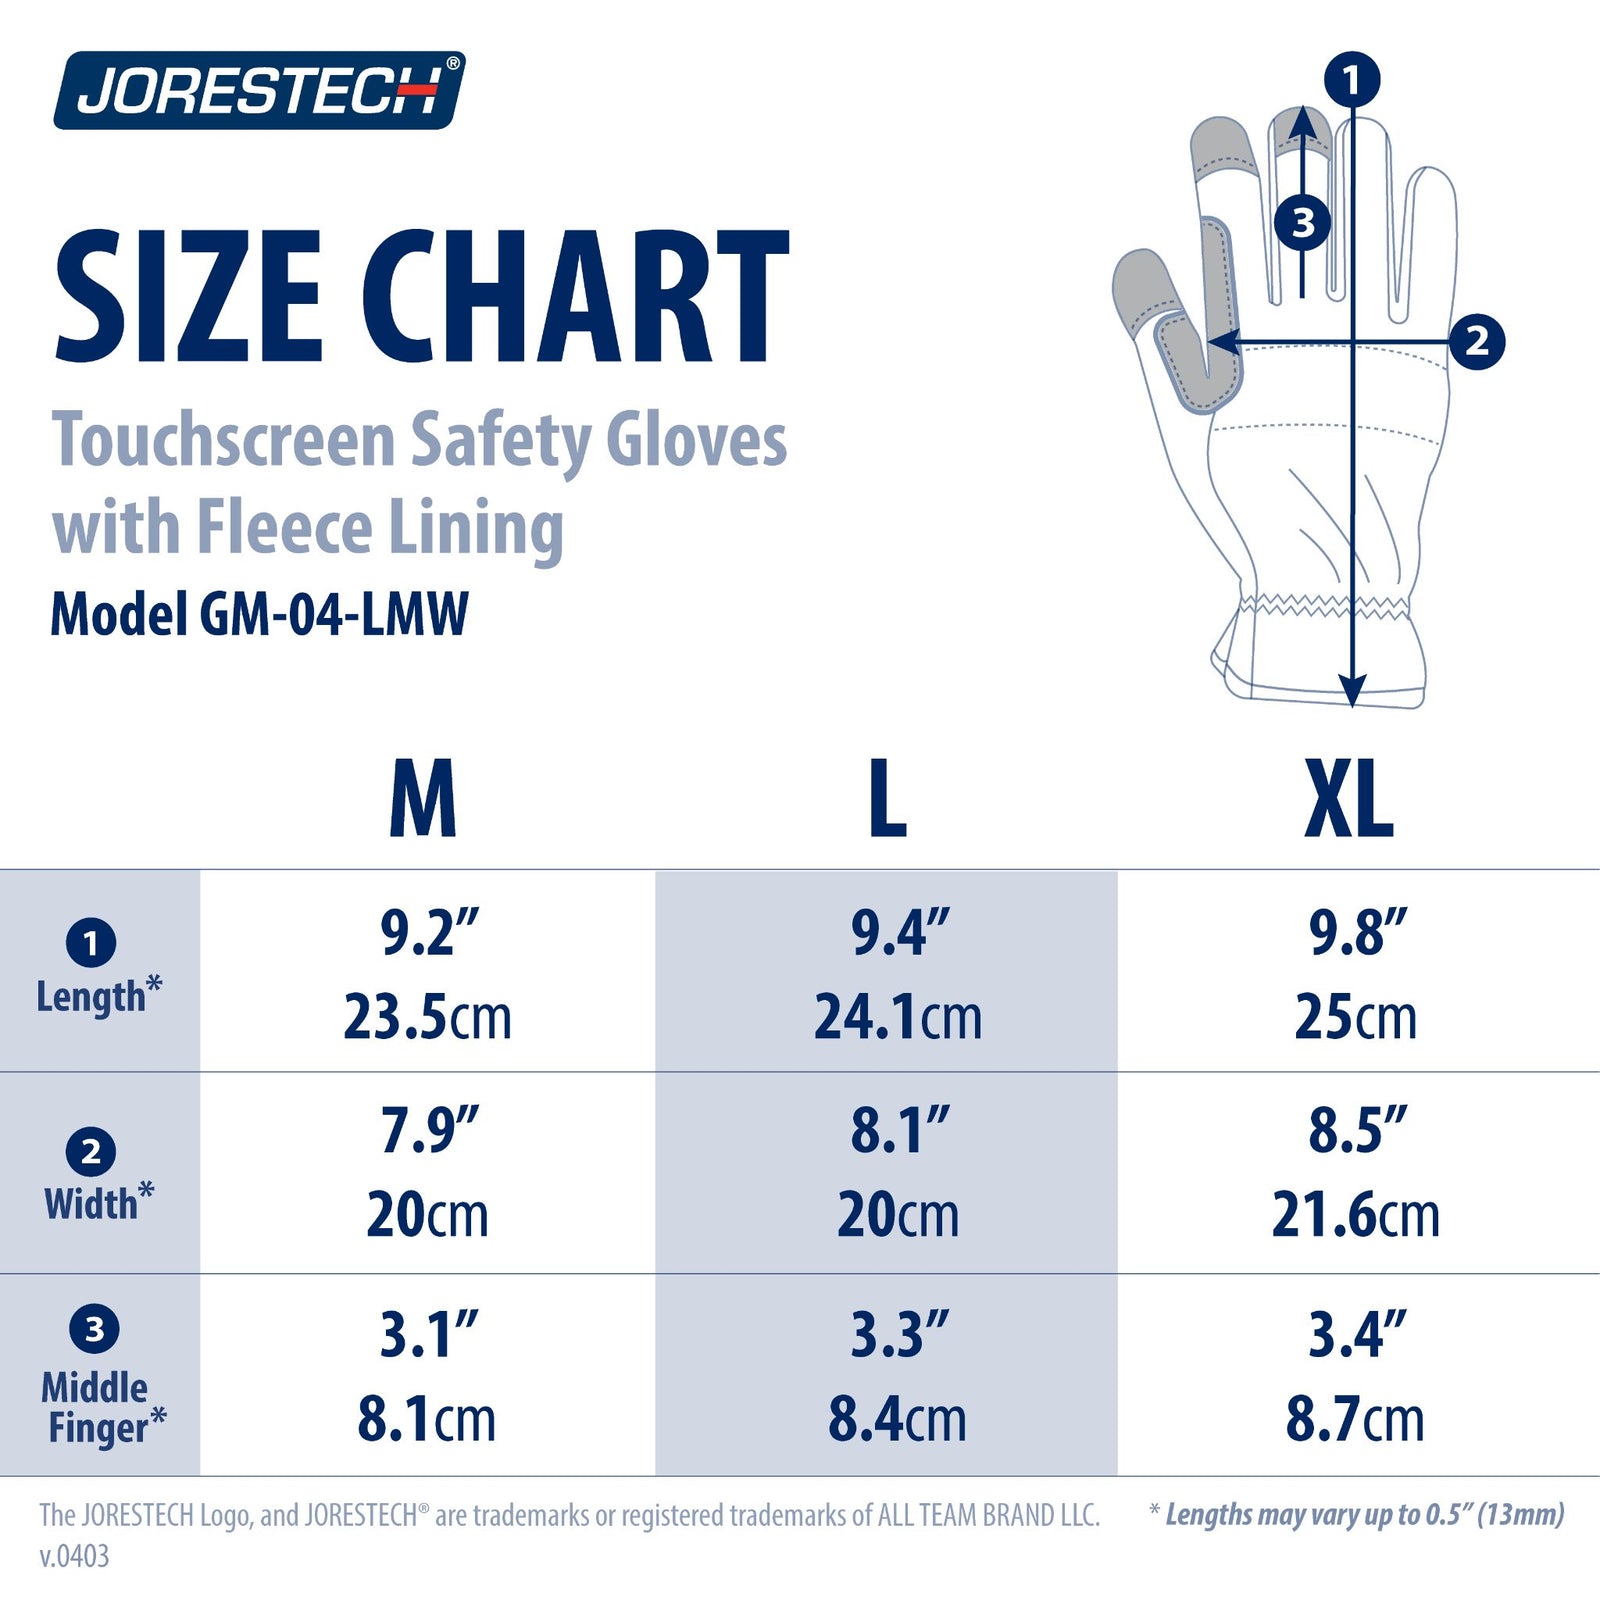 Size chart for the multipurpose touch screen safety work glove with fleece lining for weather protection